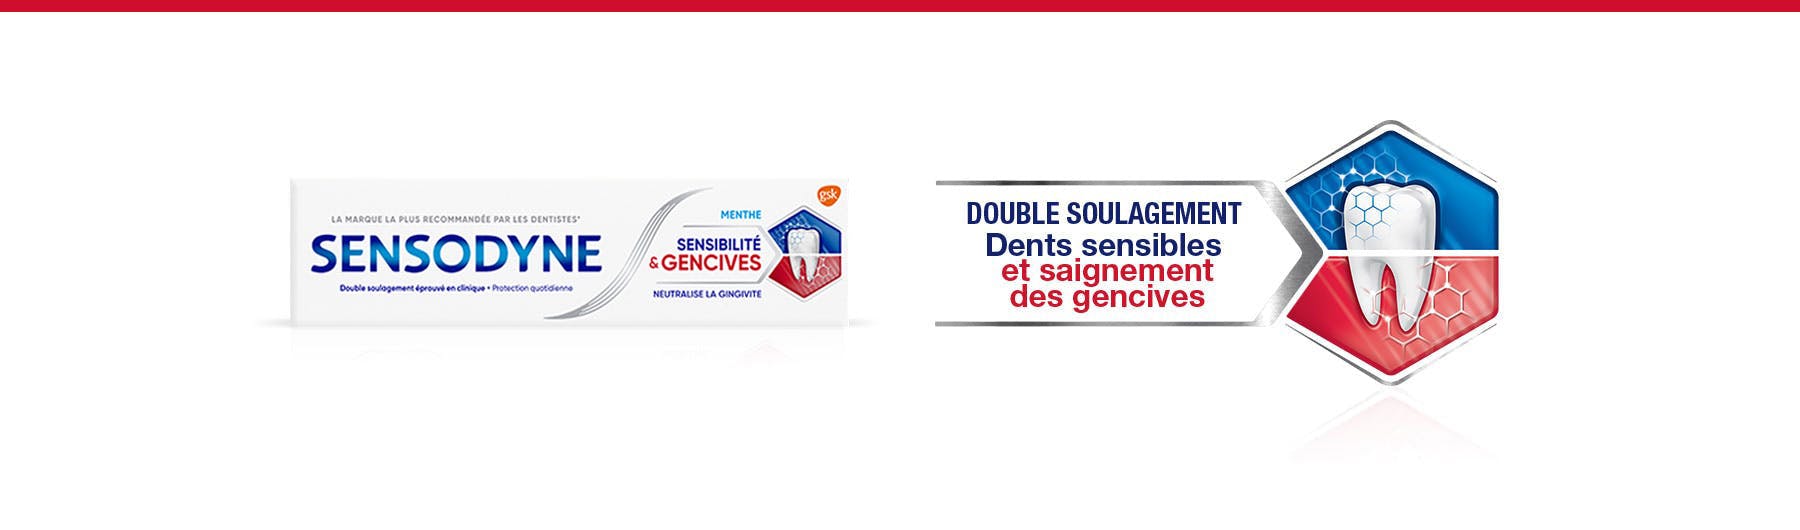 Dual relief from sensitive teeth banner